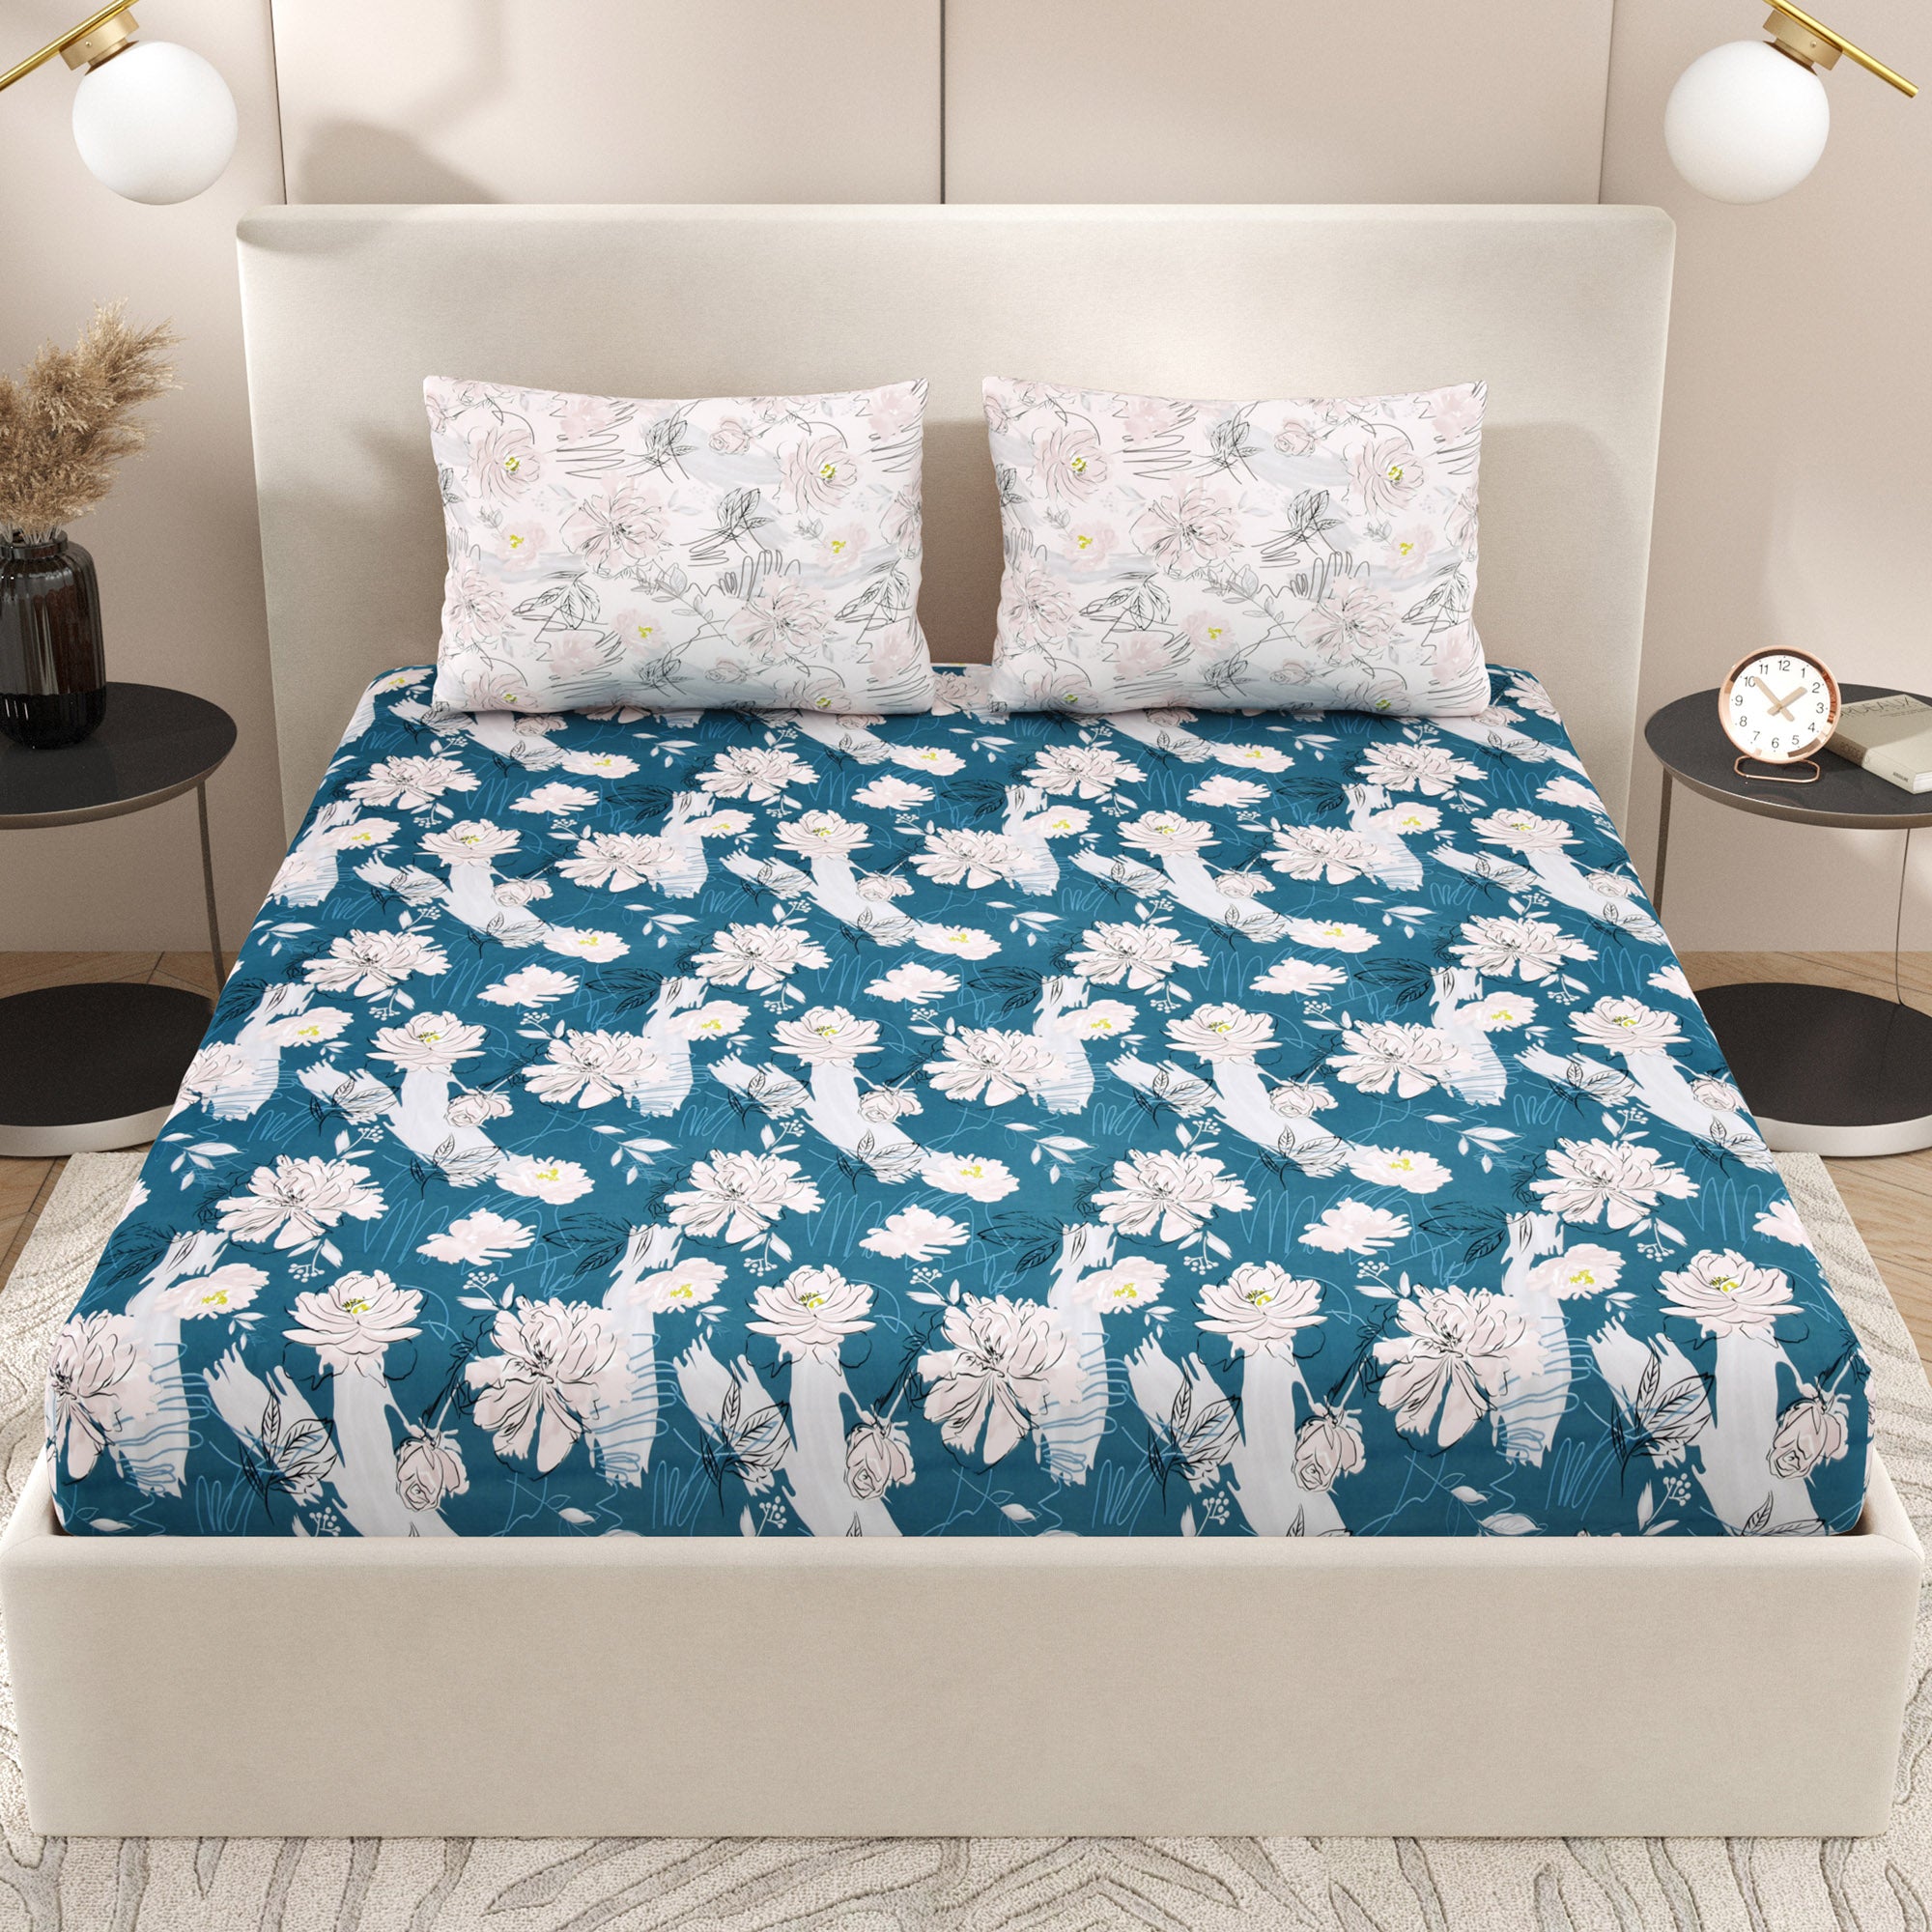 eCraftIndia 250 TC Blue, White Floral Printed Cotton Double Bedsheet With 2 Pillow Covers